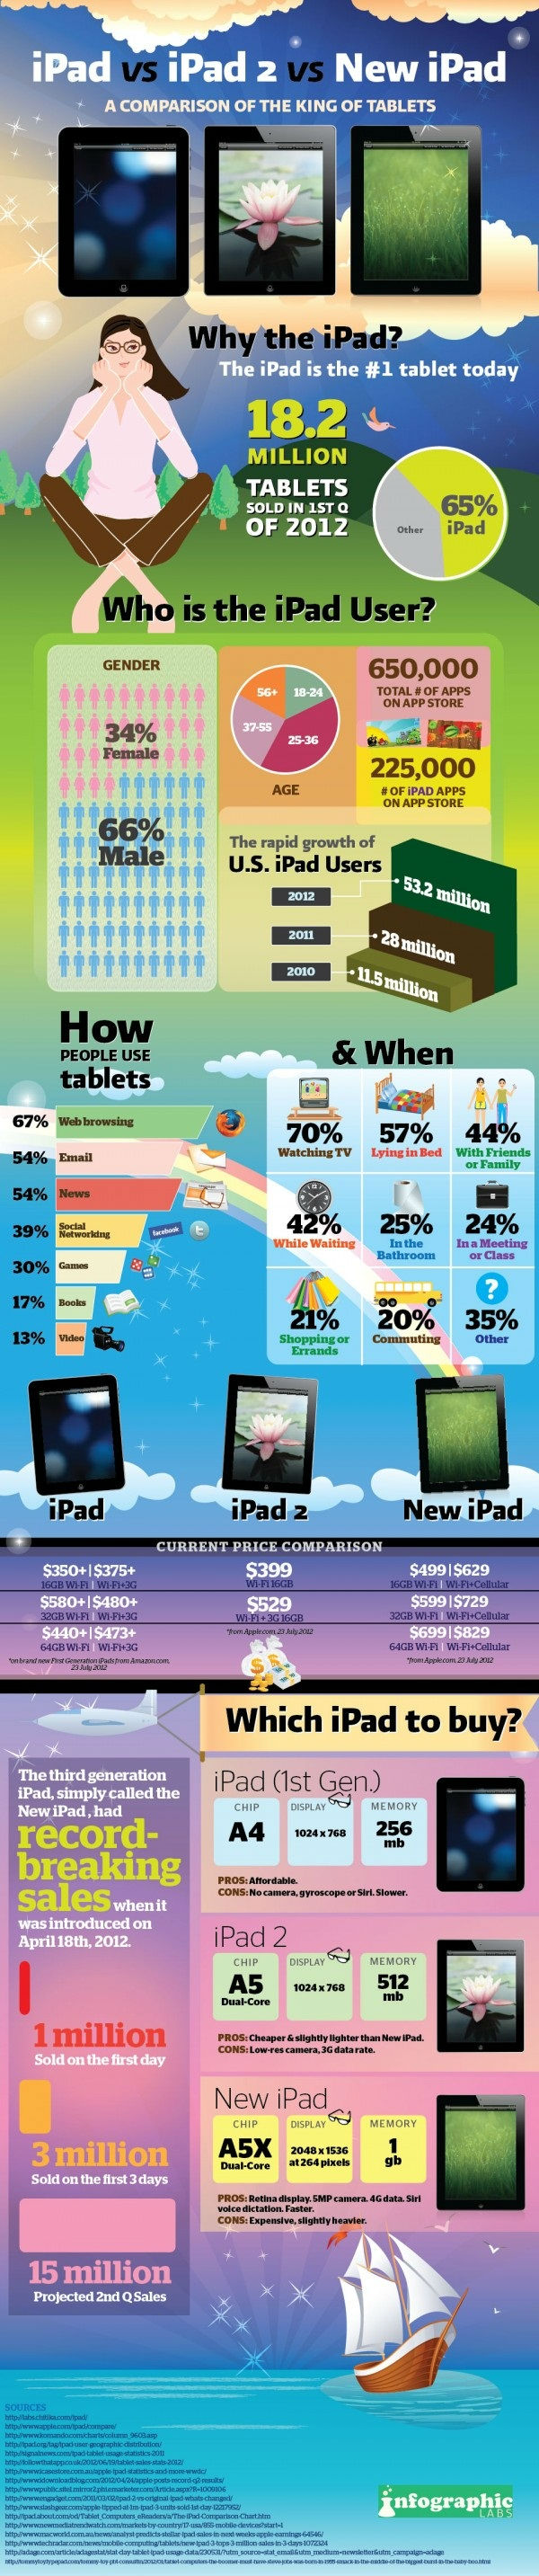 The Best Uses For Your Apple iPad Described In An Infographic